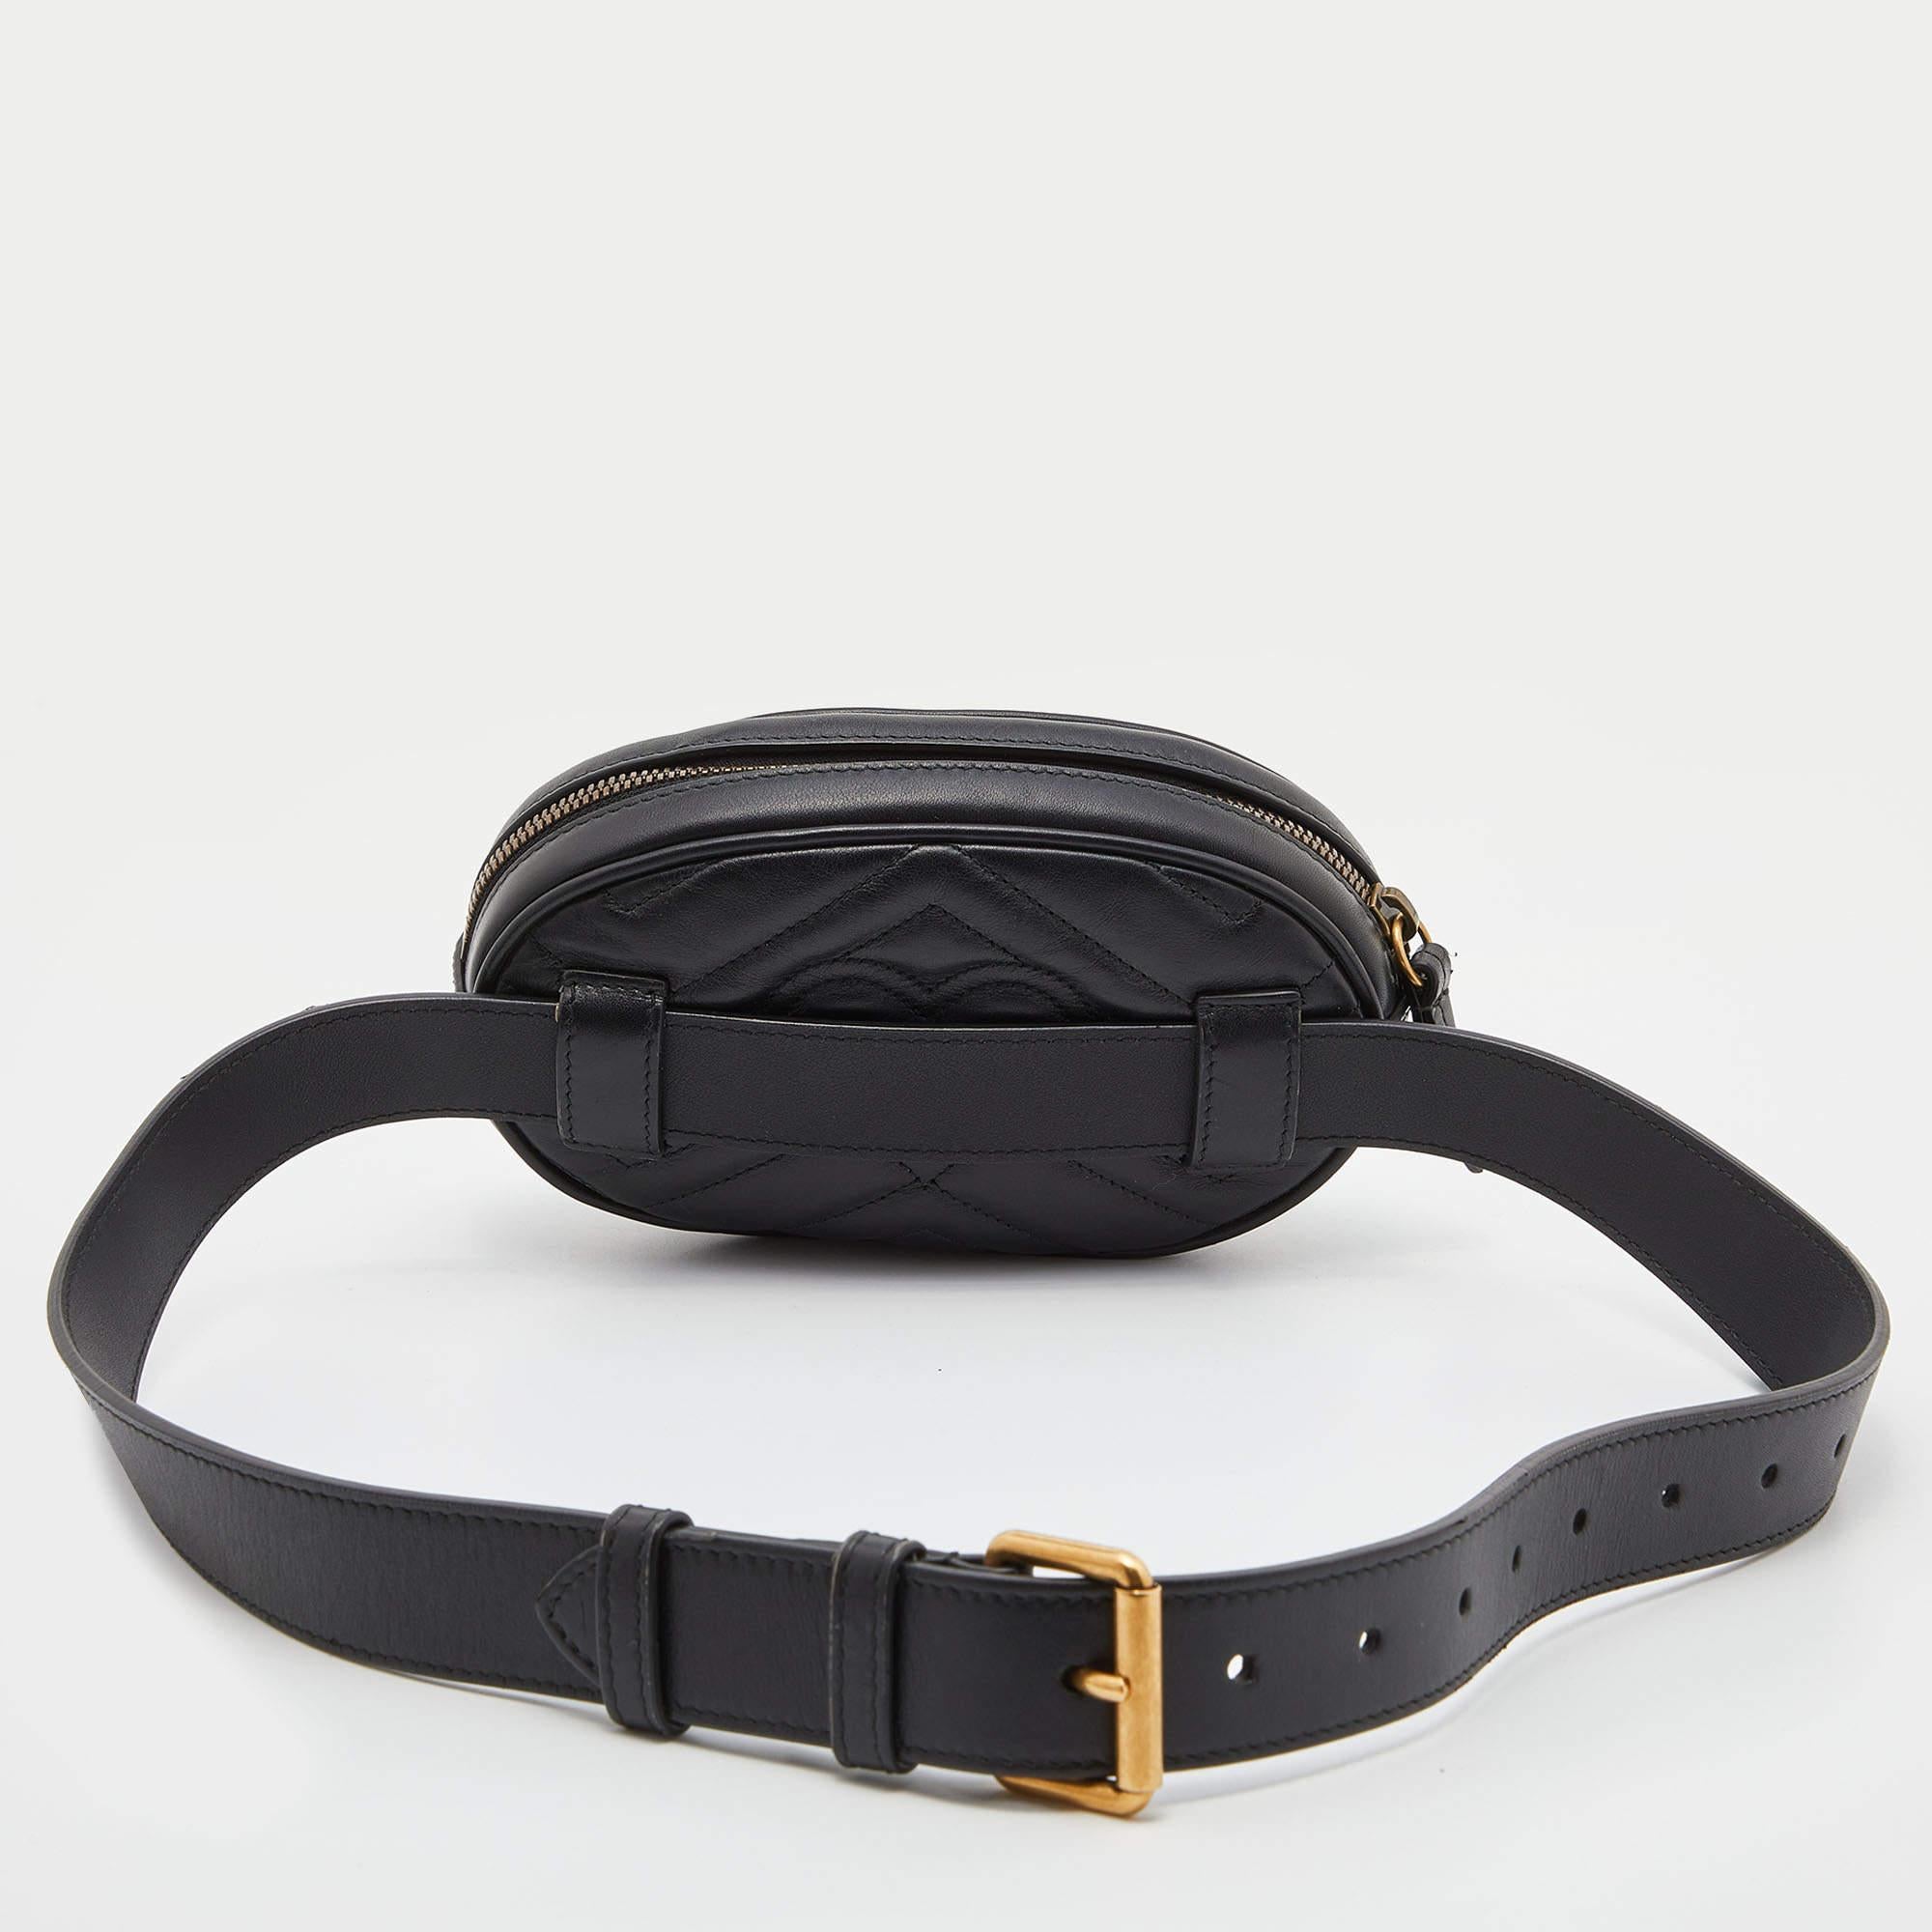 The Gucci GG Marmont belt bag is a stylish and versatile accessory. Crafted from black leather with matelassé stitching, it features the iconic GG logo, a flap closure, and an adjustable belt strap. Perfect for hands-free convenience and adding a